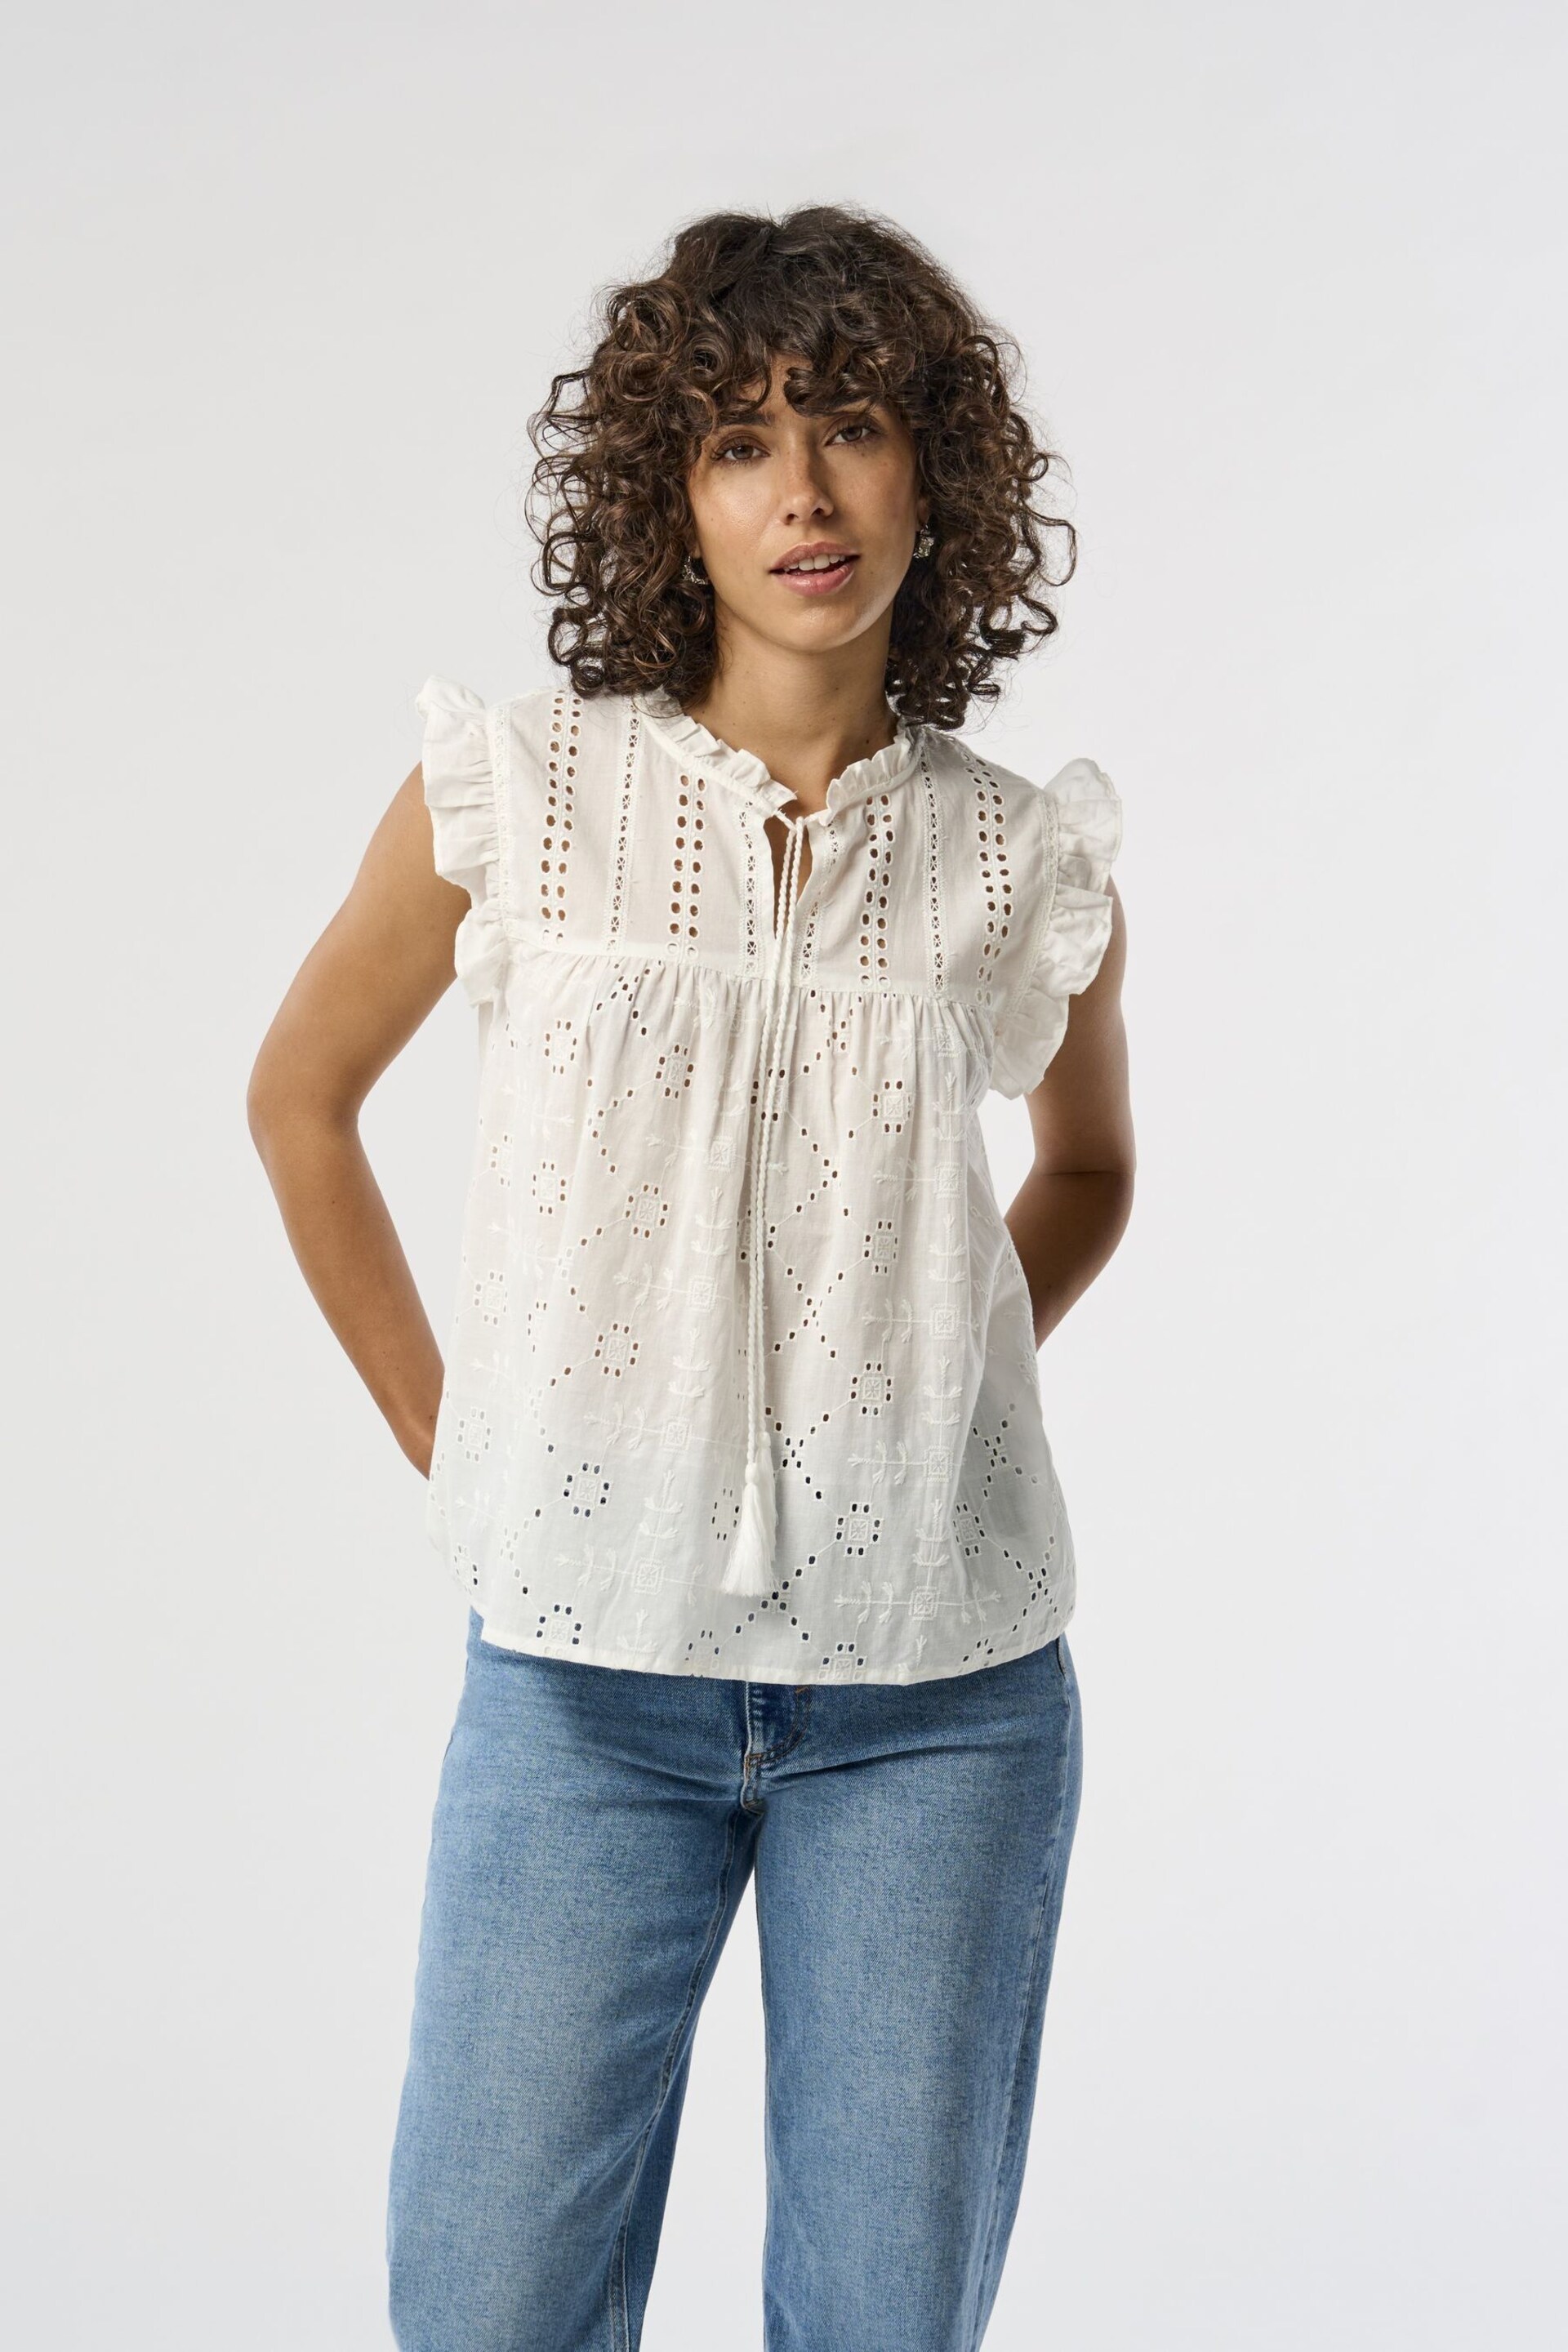 ONLY White Broderie Frill Tie Front Blouse - Image 1 of 6